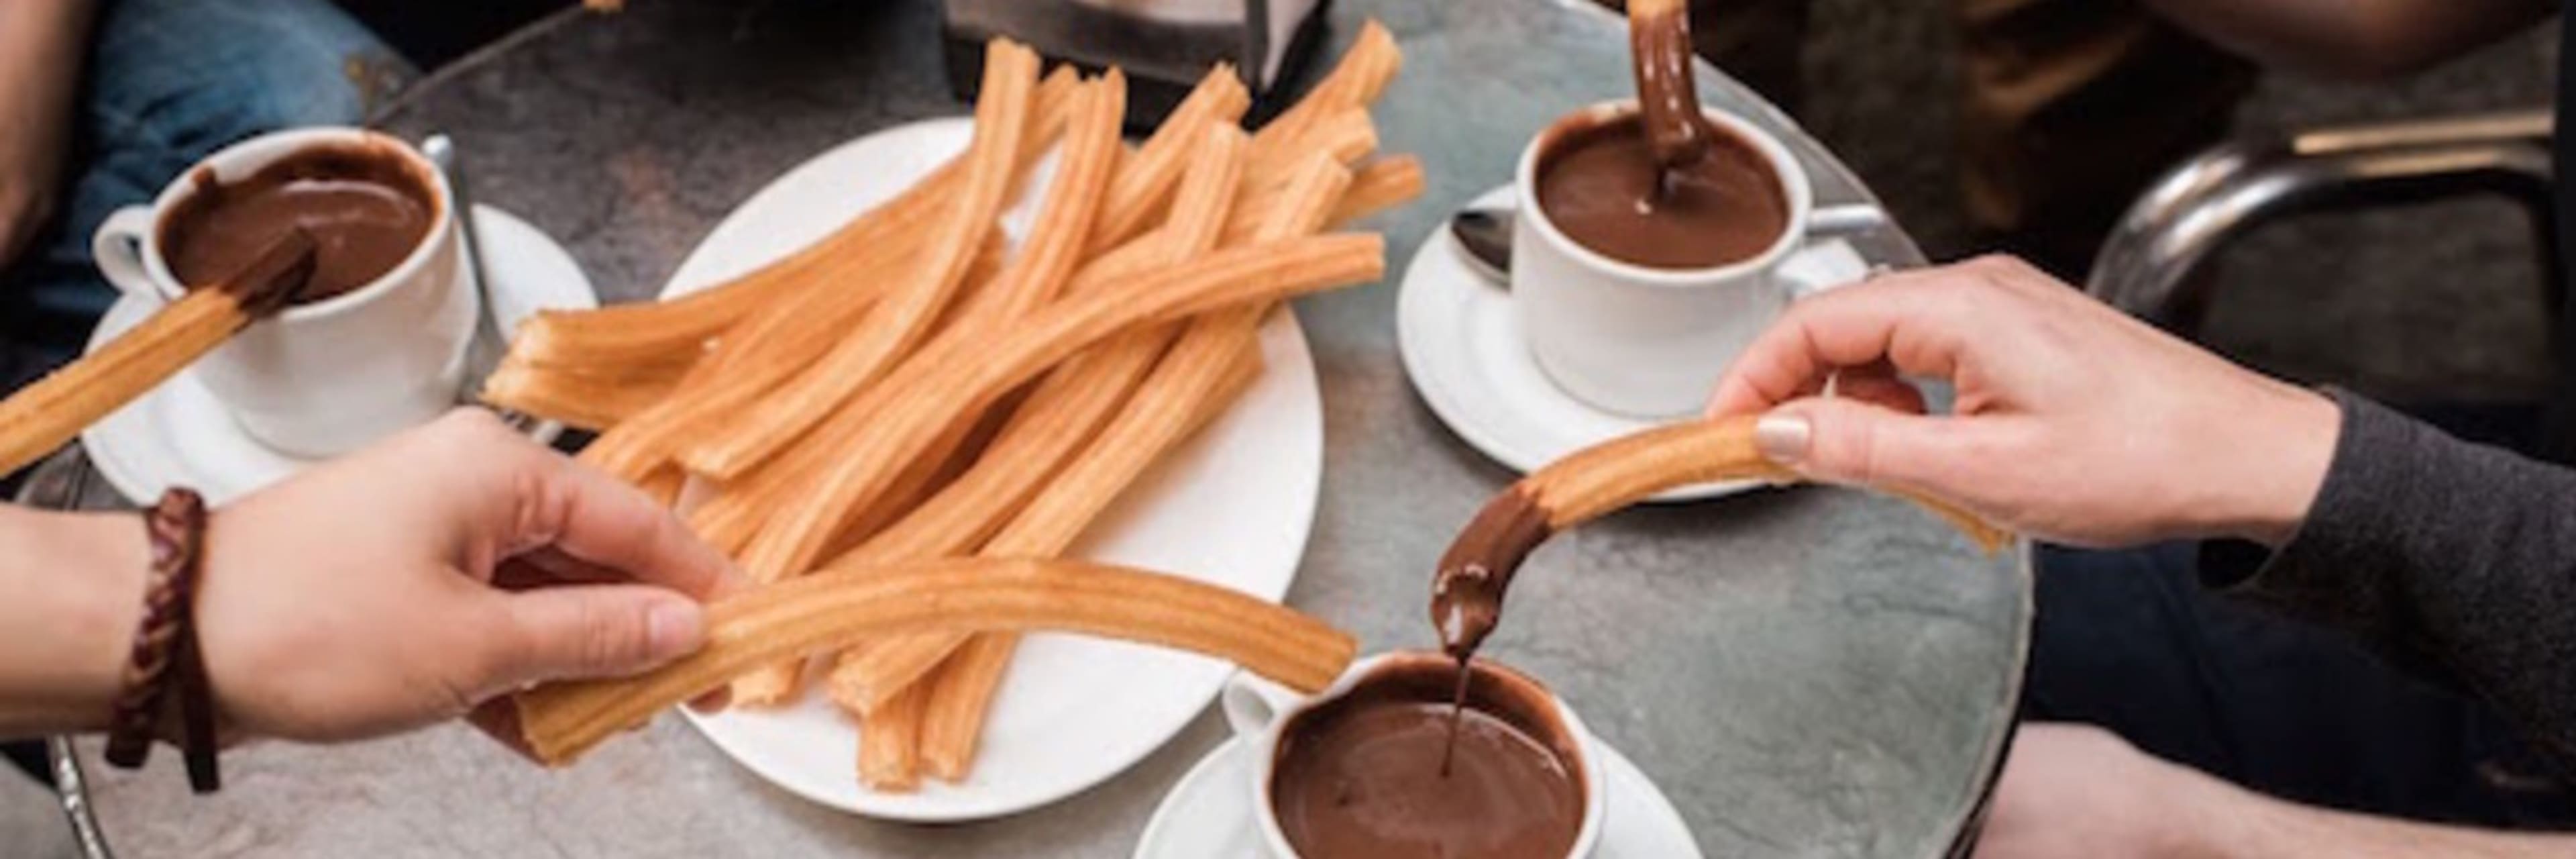 Friends sharing churros with dipping chocolate.